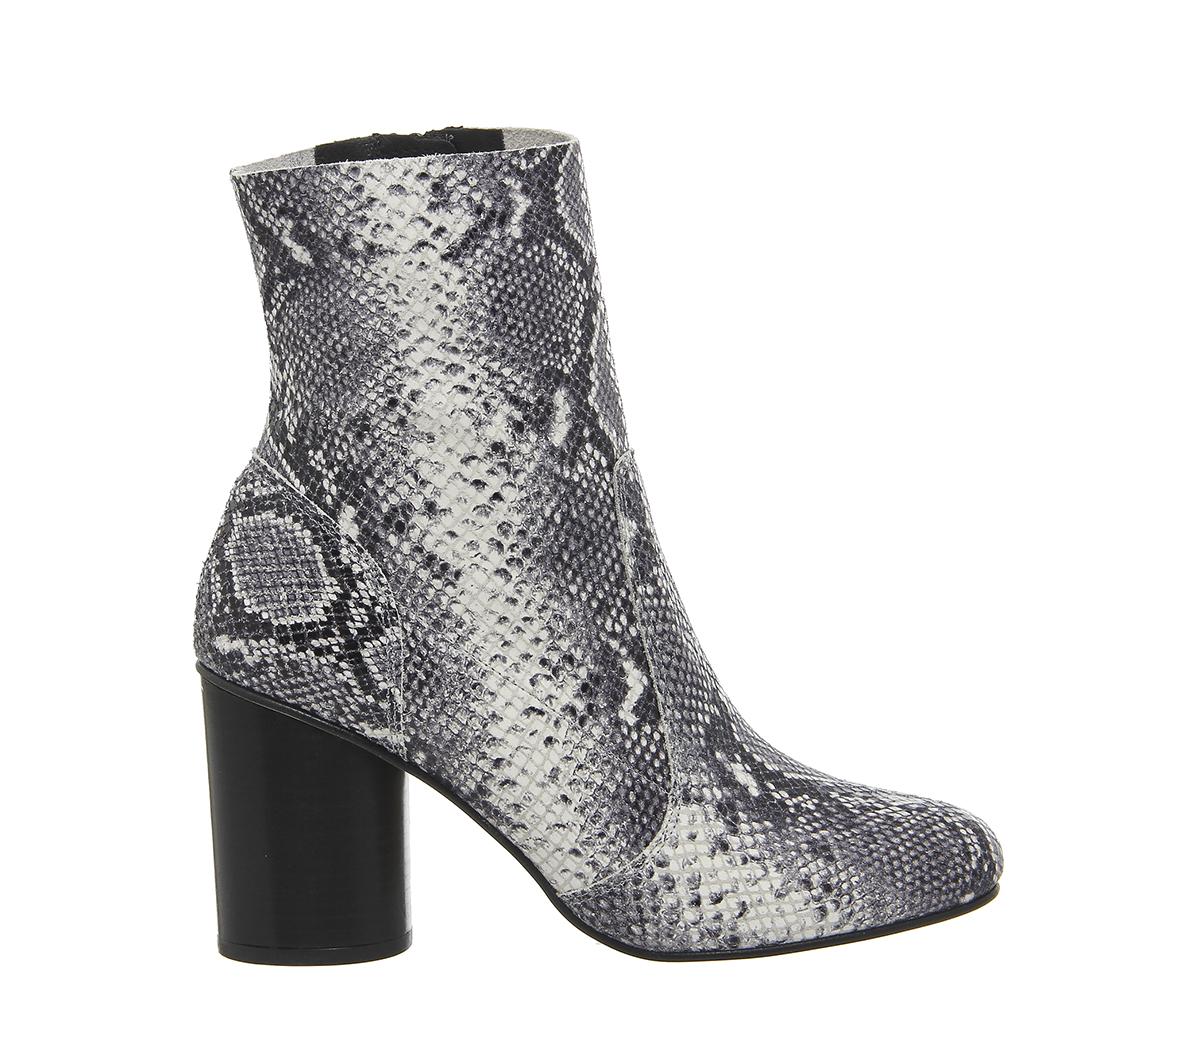 OFFICE Ida Cylindrical Heel Boots Black And White Snake Embossed ...